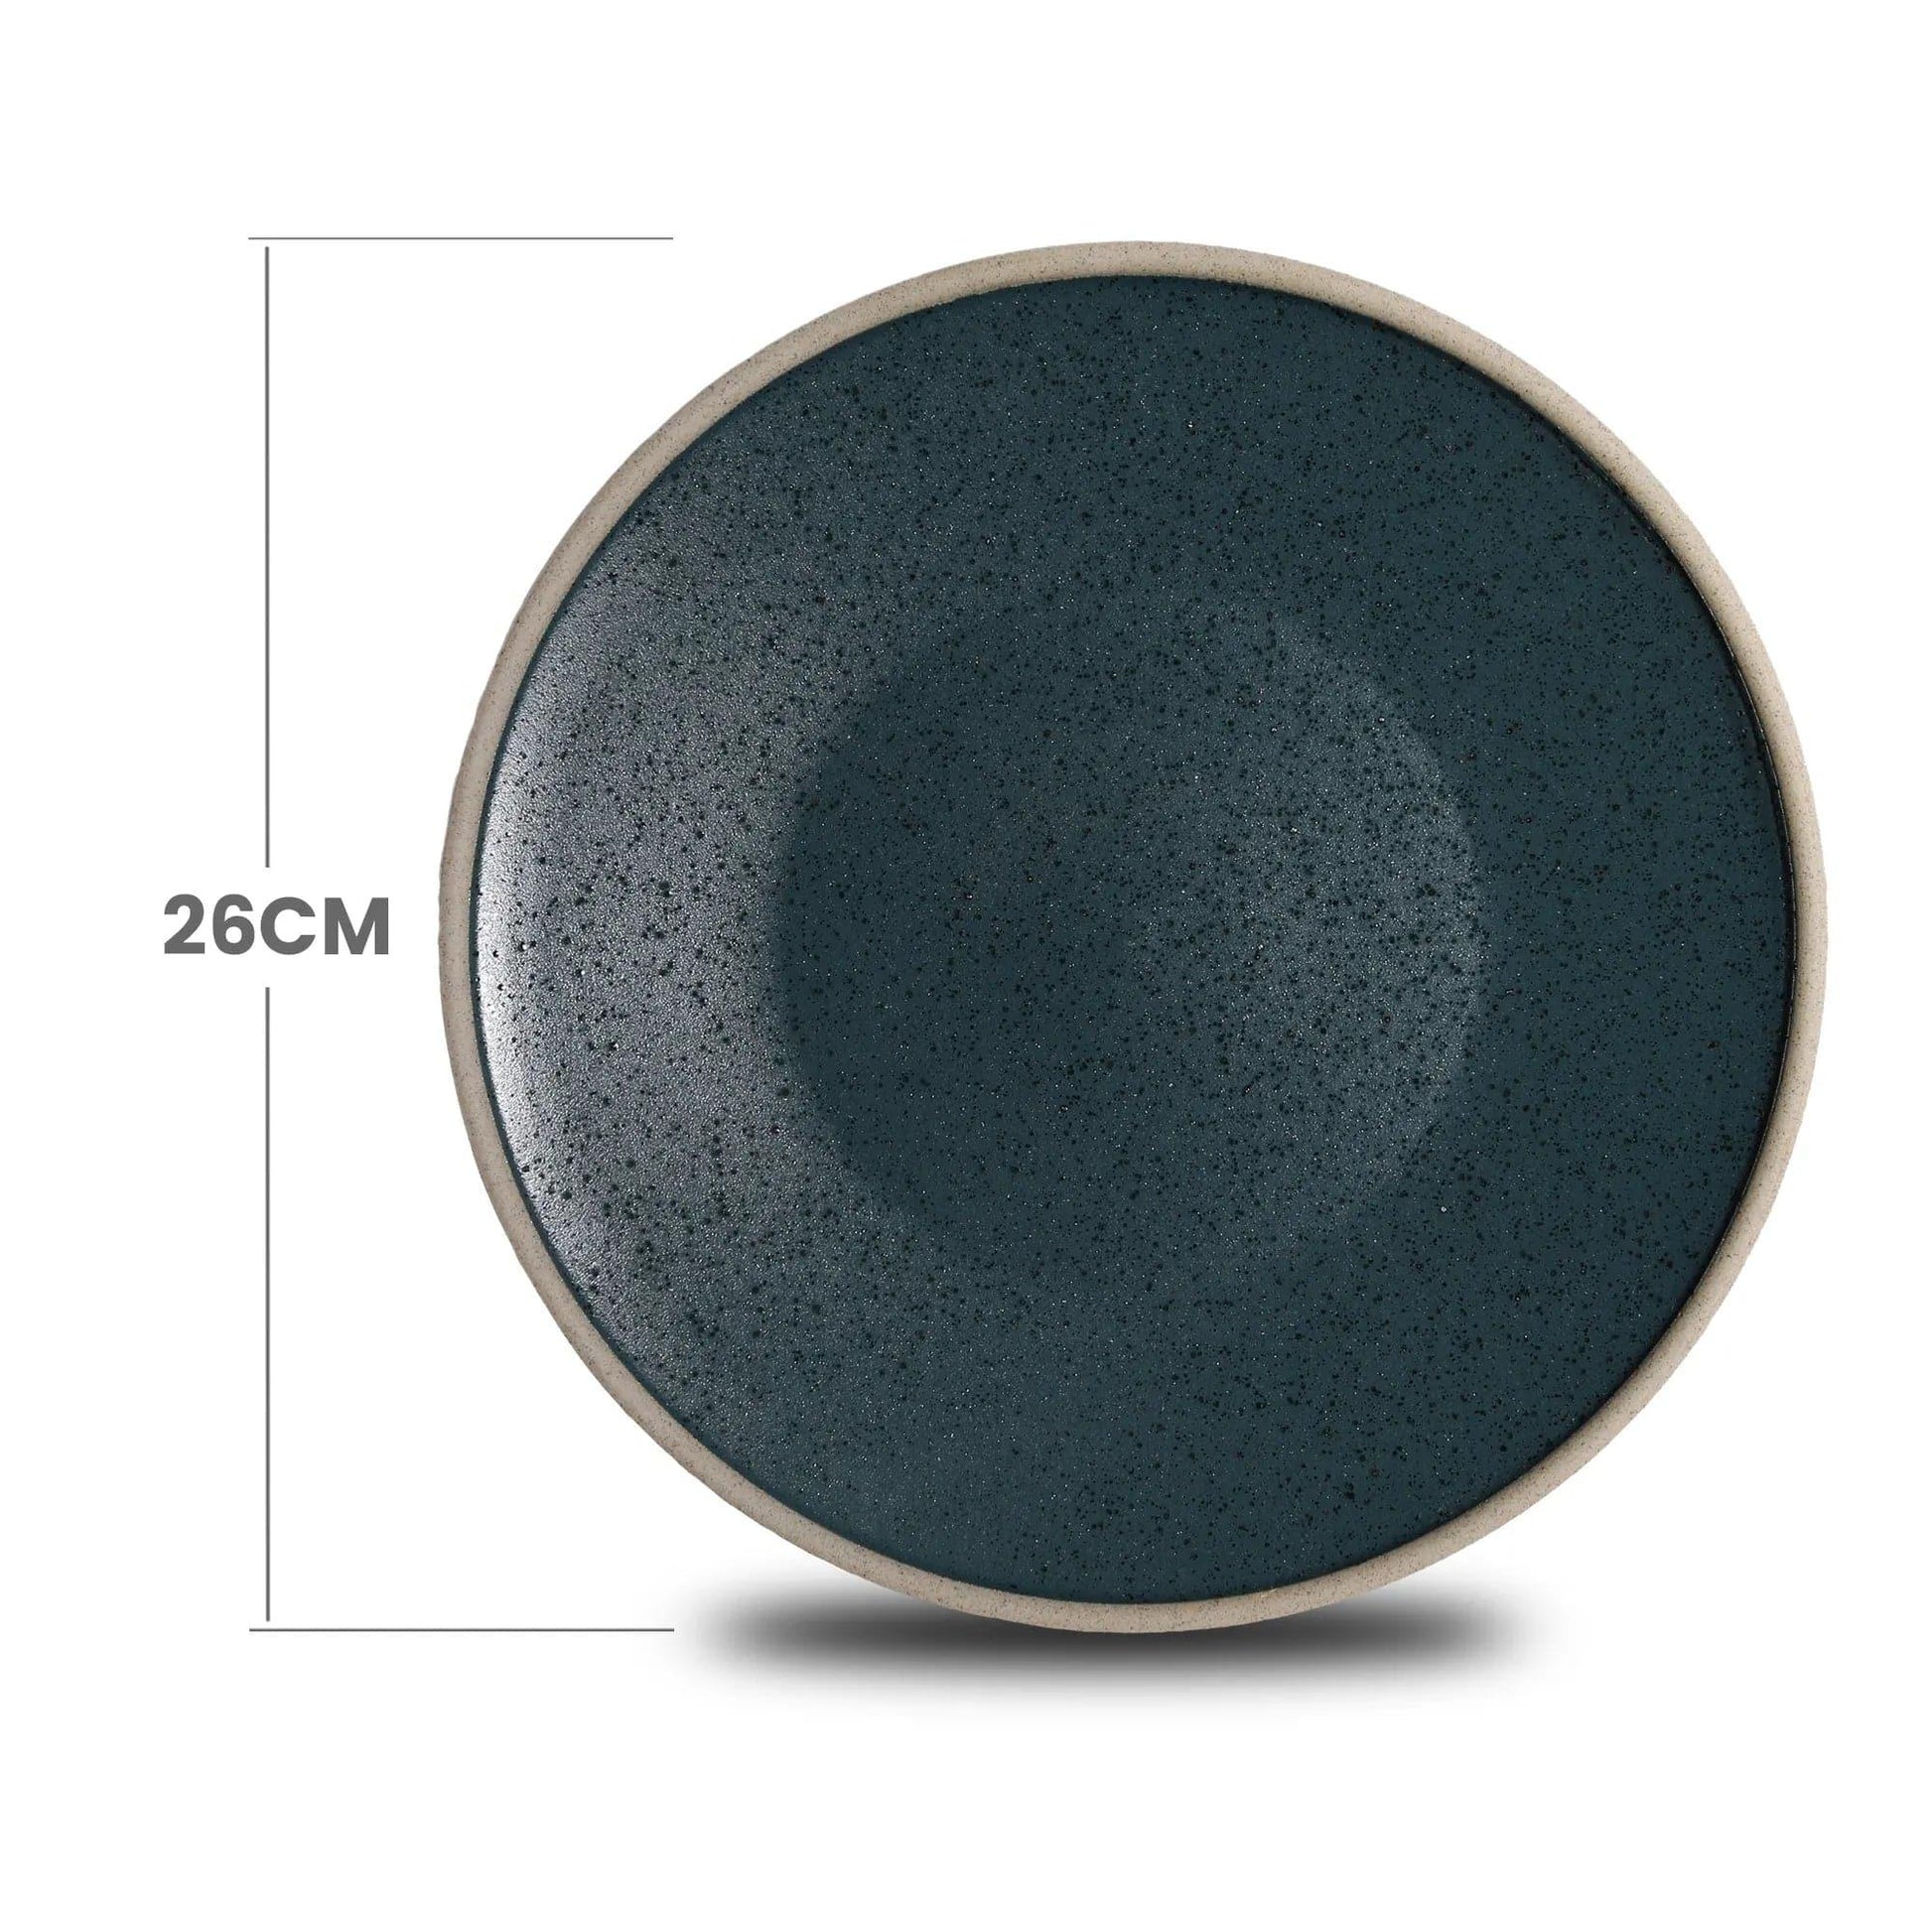 Don Bellini Night & Day 10.25"/26cm Midnight Blue Round Porcelain Plate - 5/Case